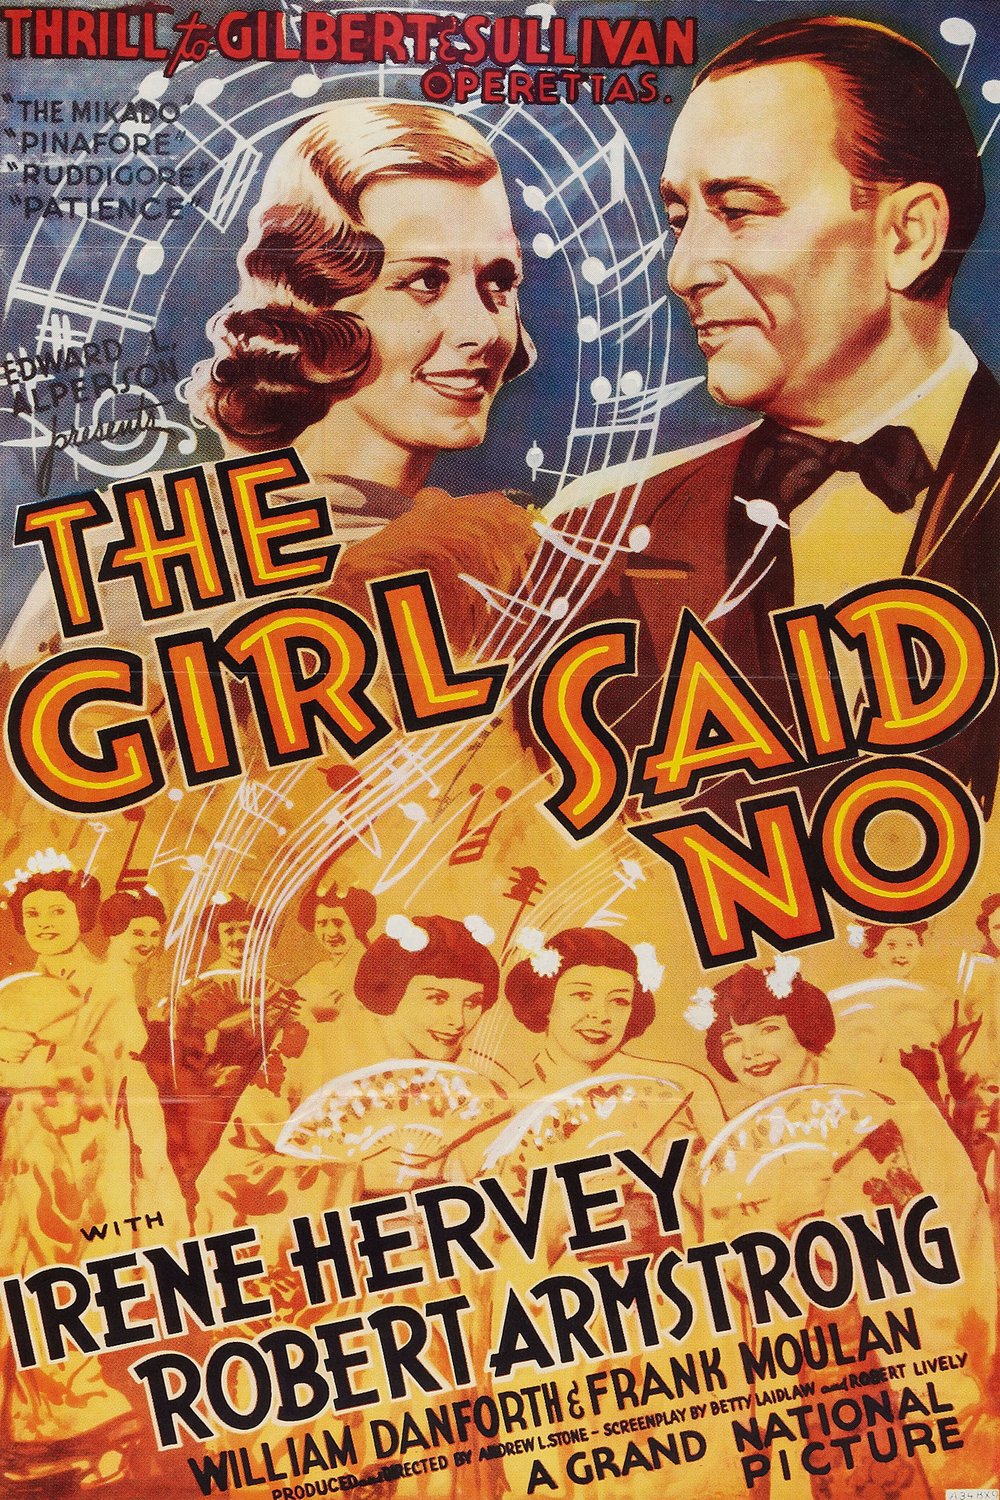 Poster of the movie The Girl Said No